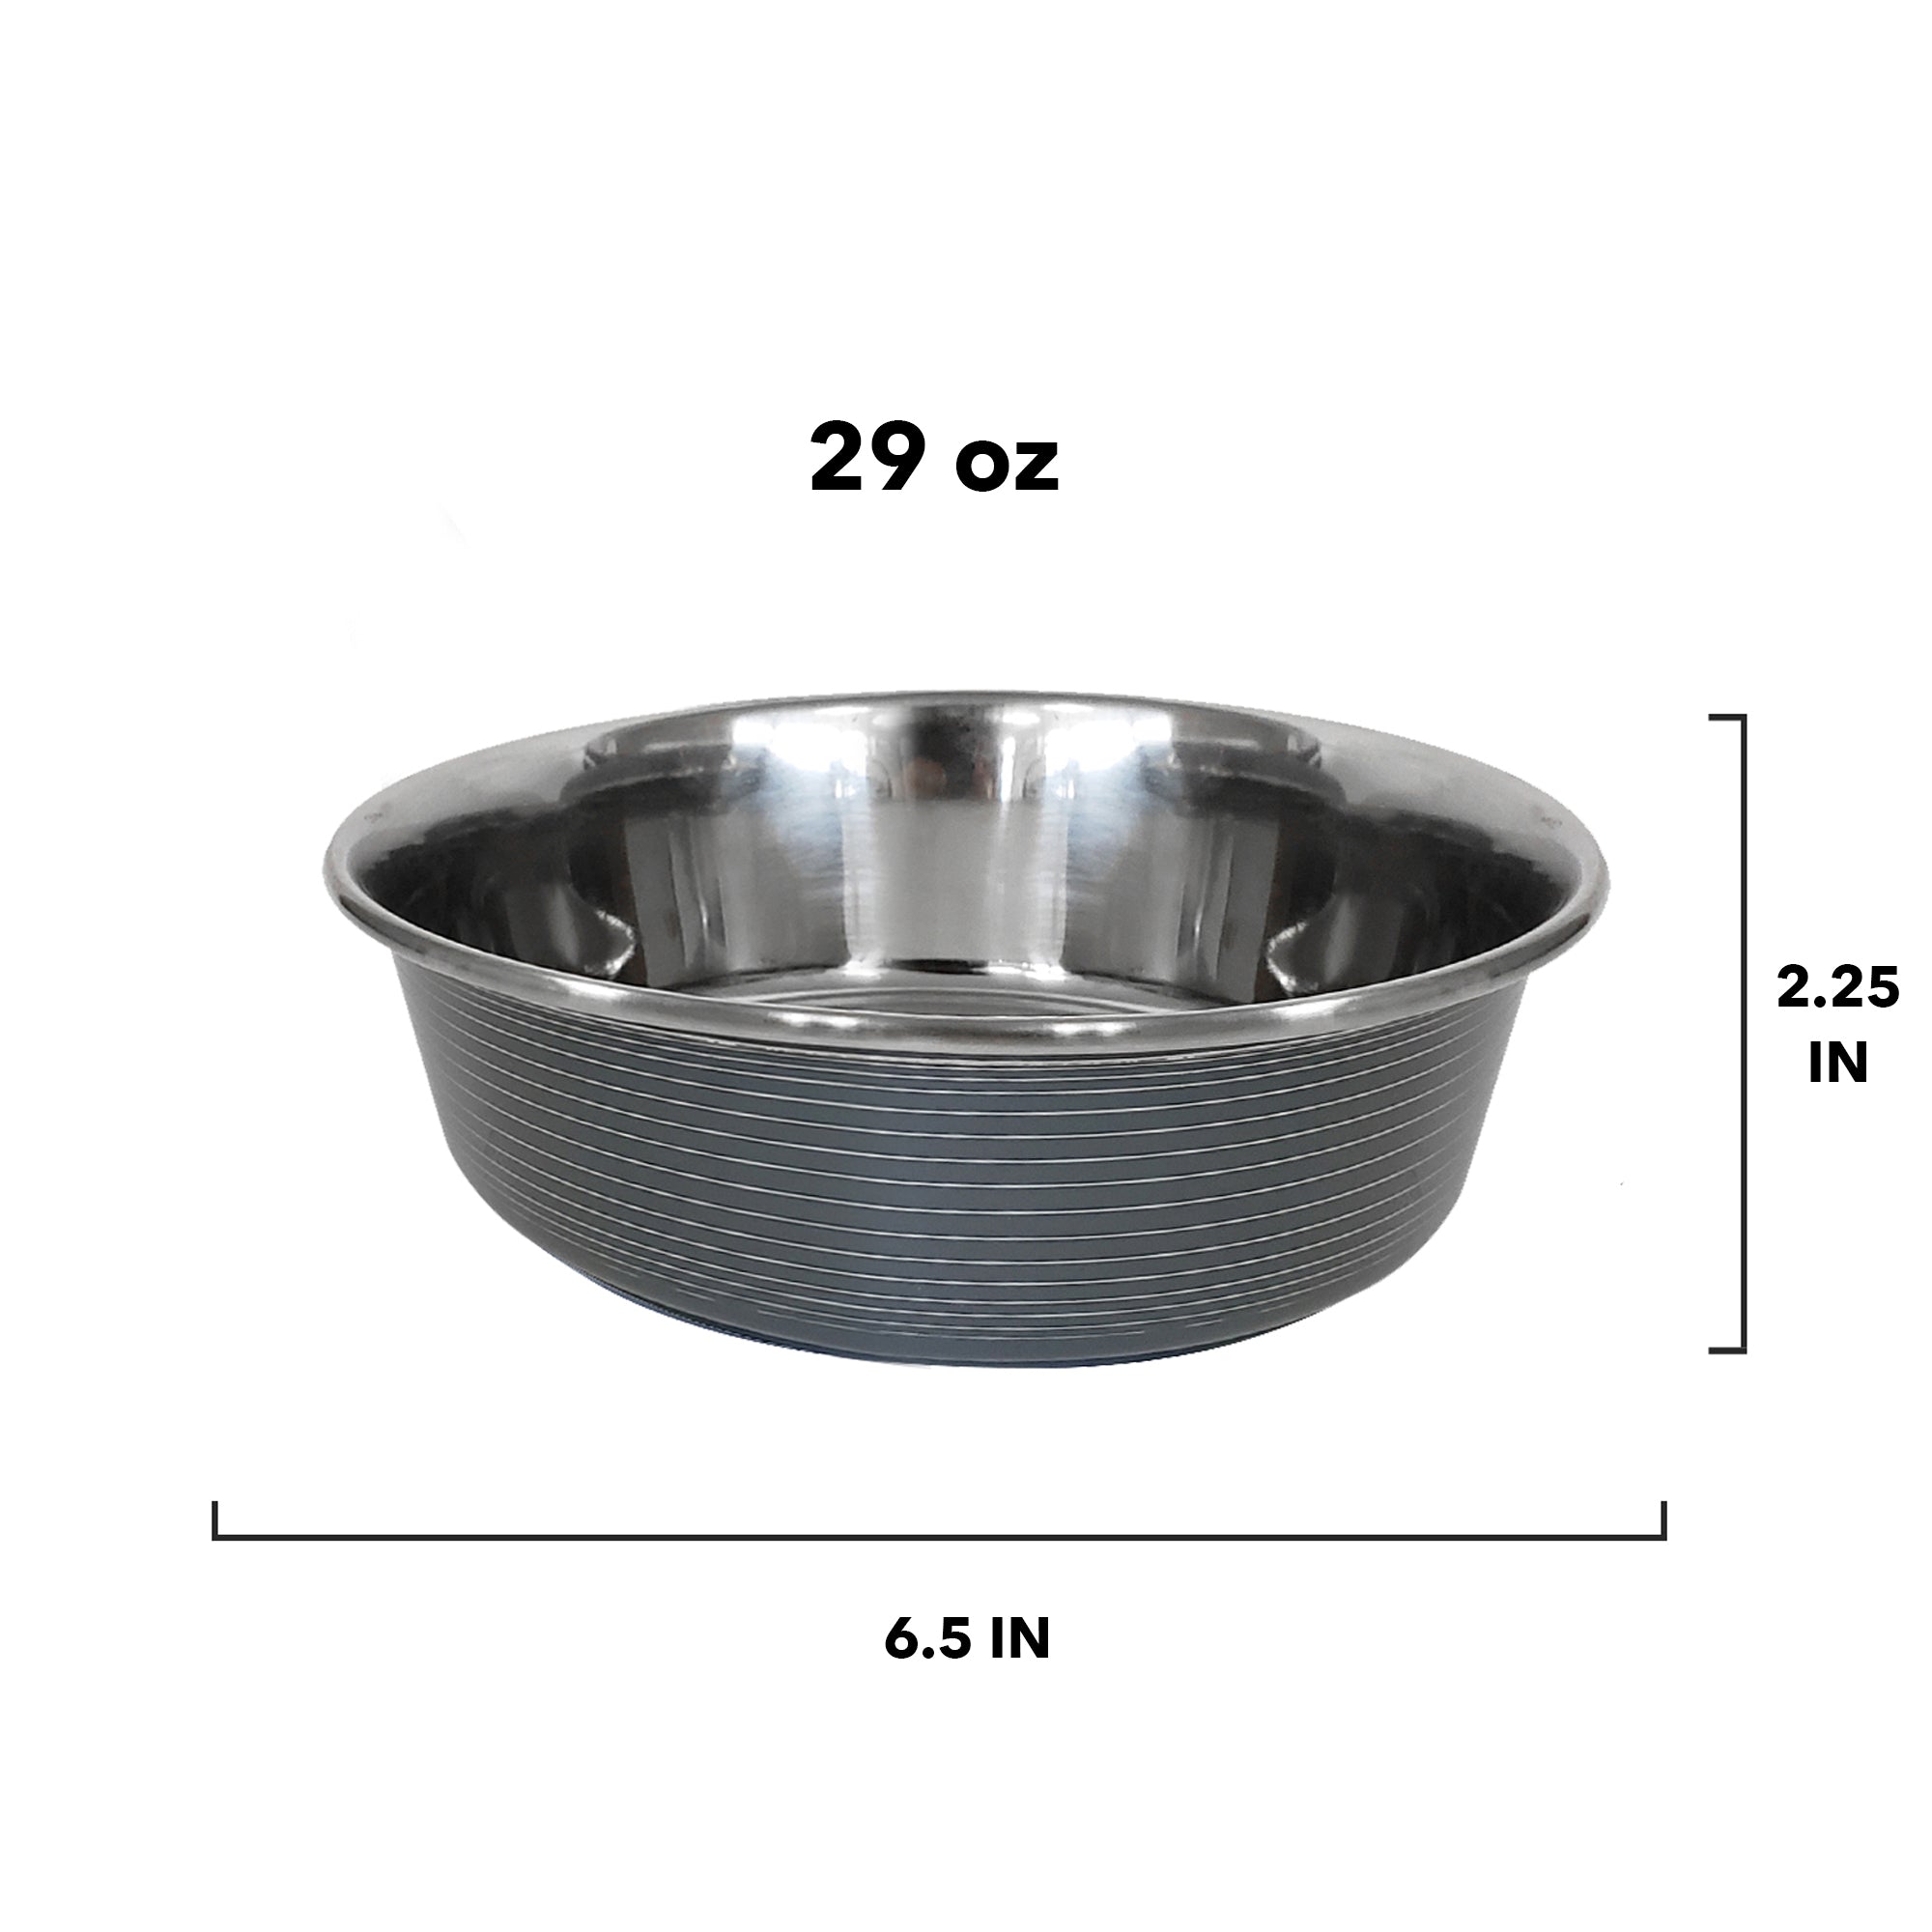 Striped Deluxe Dog Bowl - Stainless Steel - Gray - 29 oz